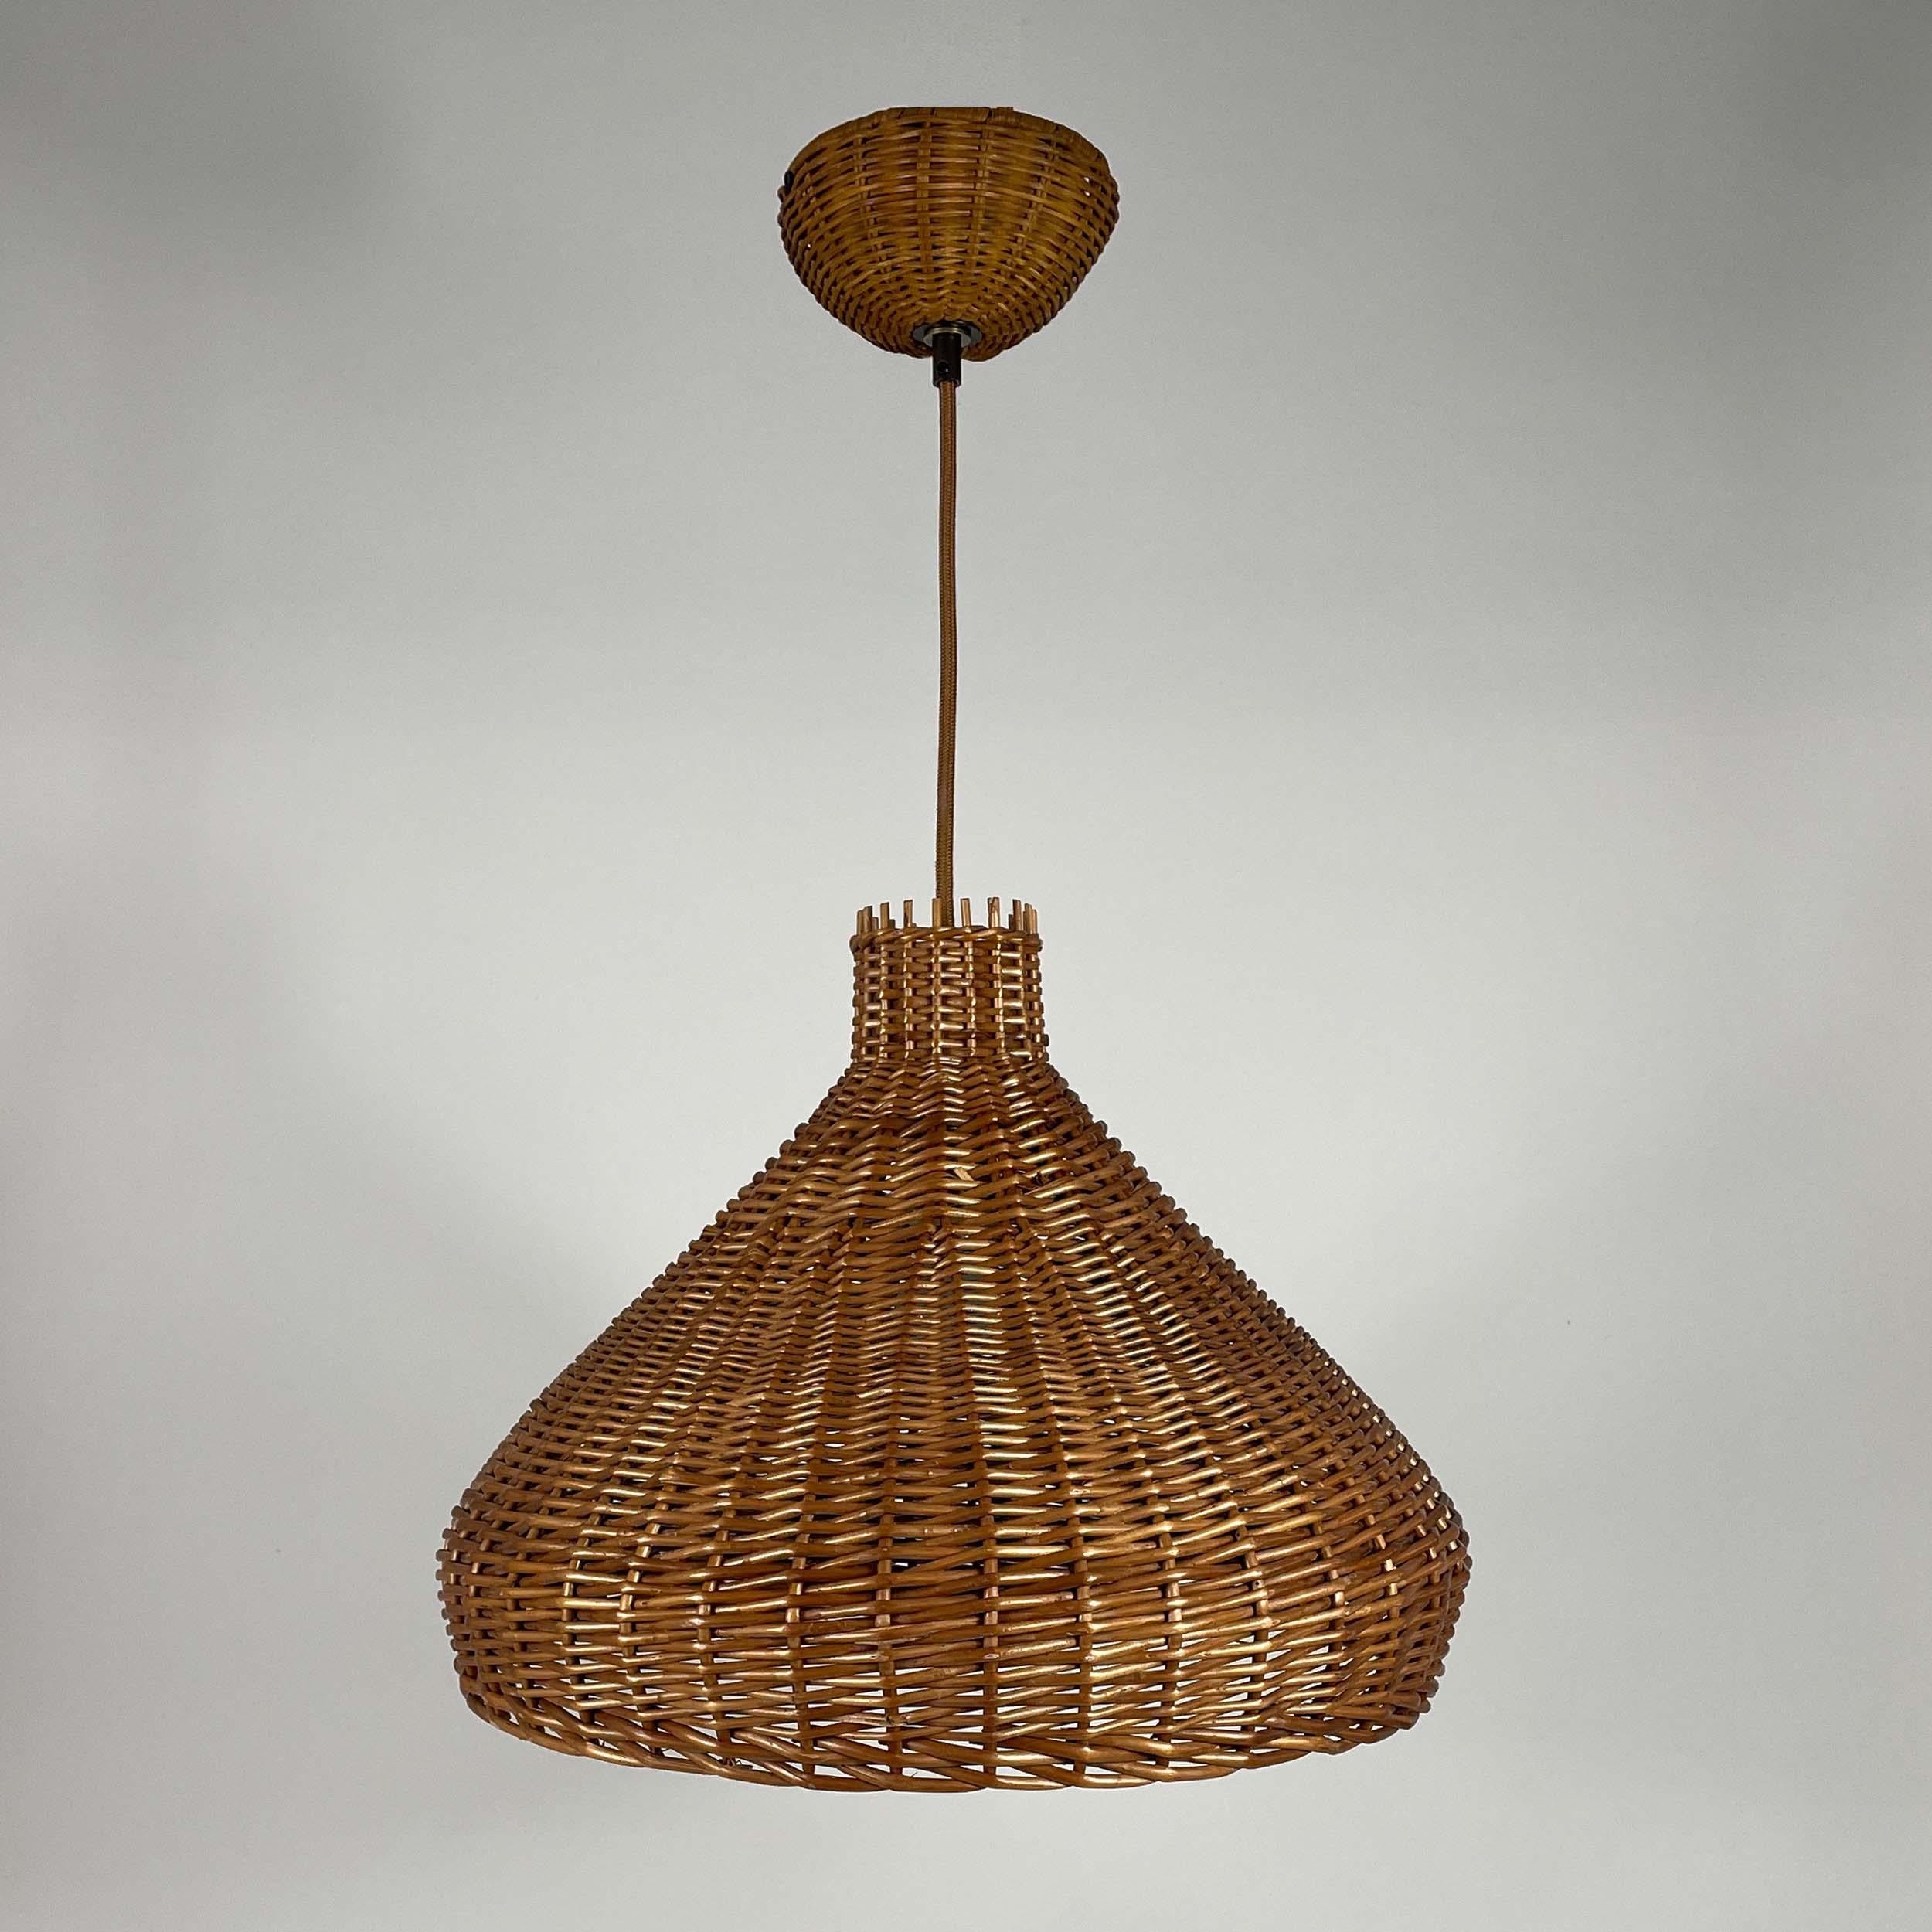 This rattan pendant or suspension light was designed and manufactured in Sweden in the 1960s. It features a large tulip shaped lampshade, brown fabric cord and a rattan canopy.

The light has been rewired for use in US and any other country of the